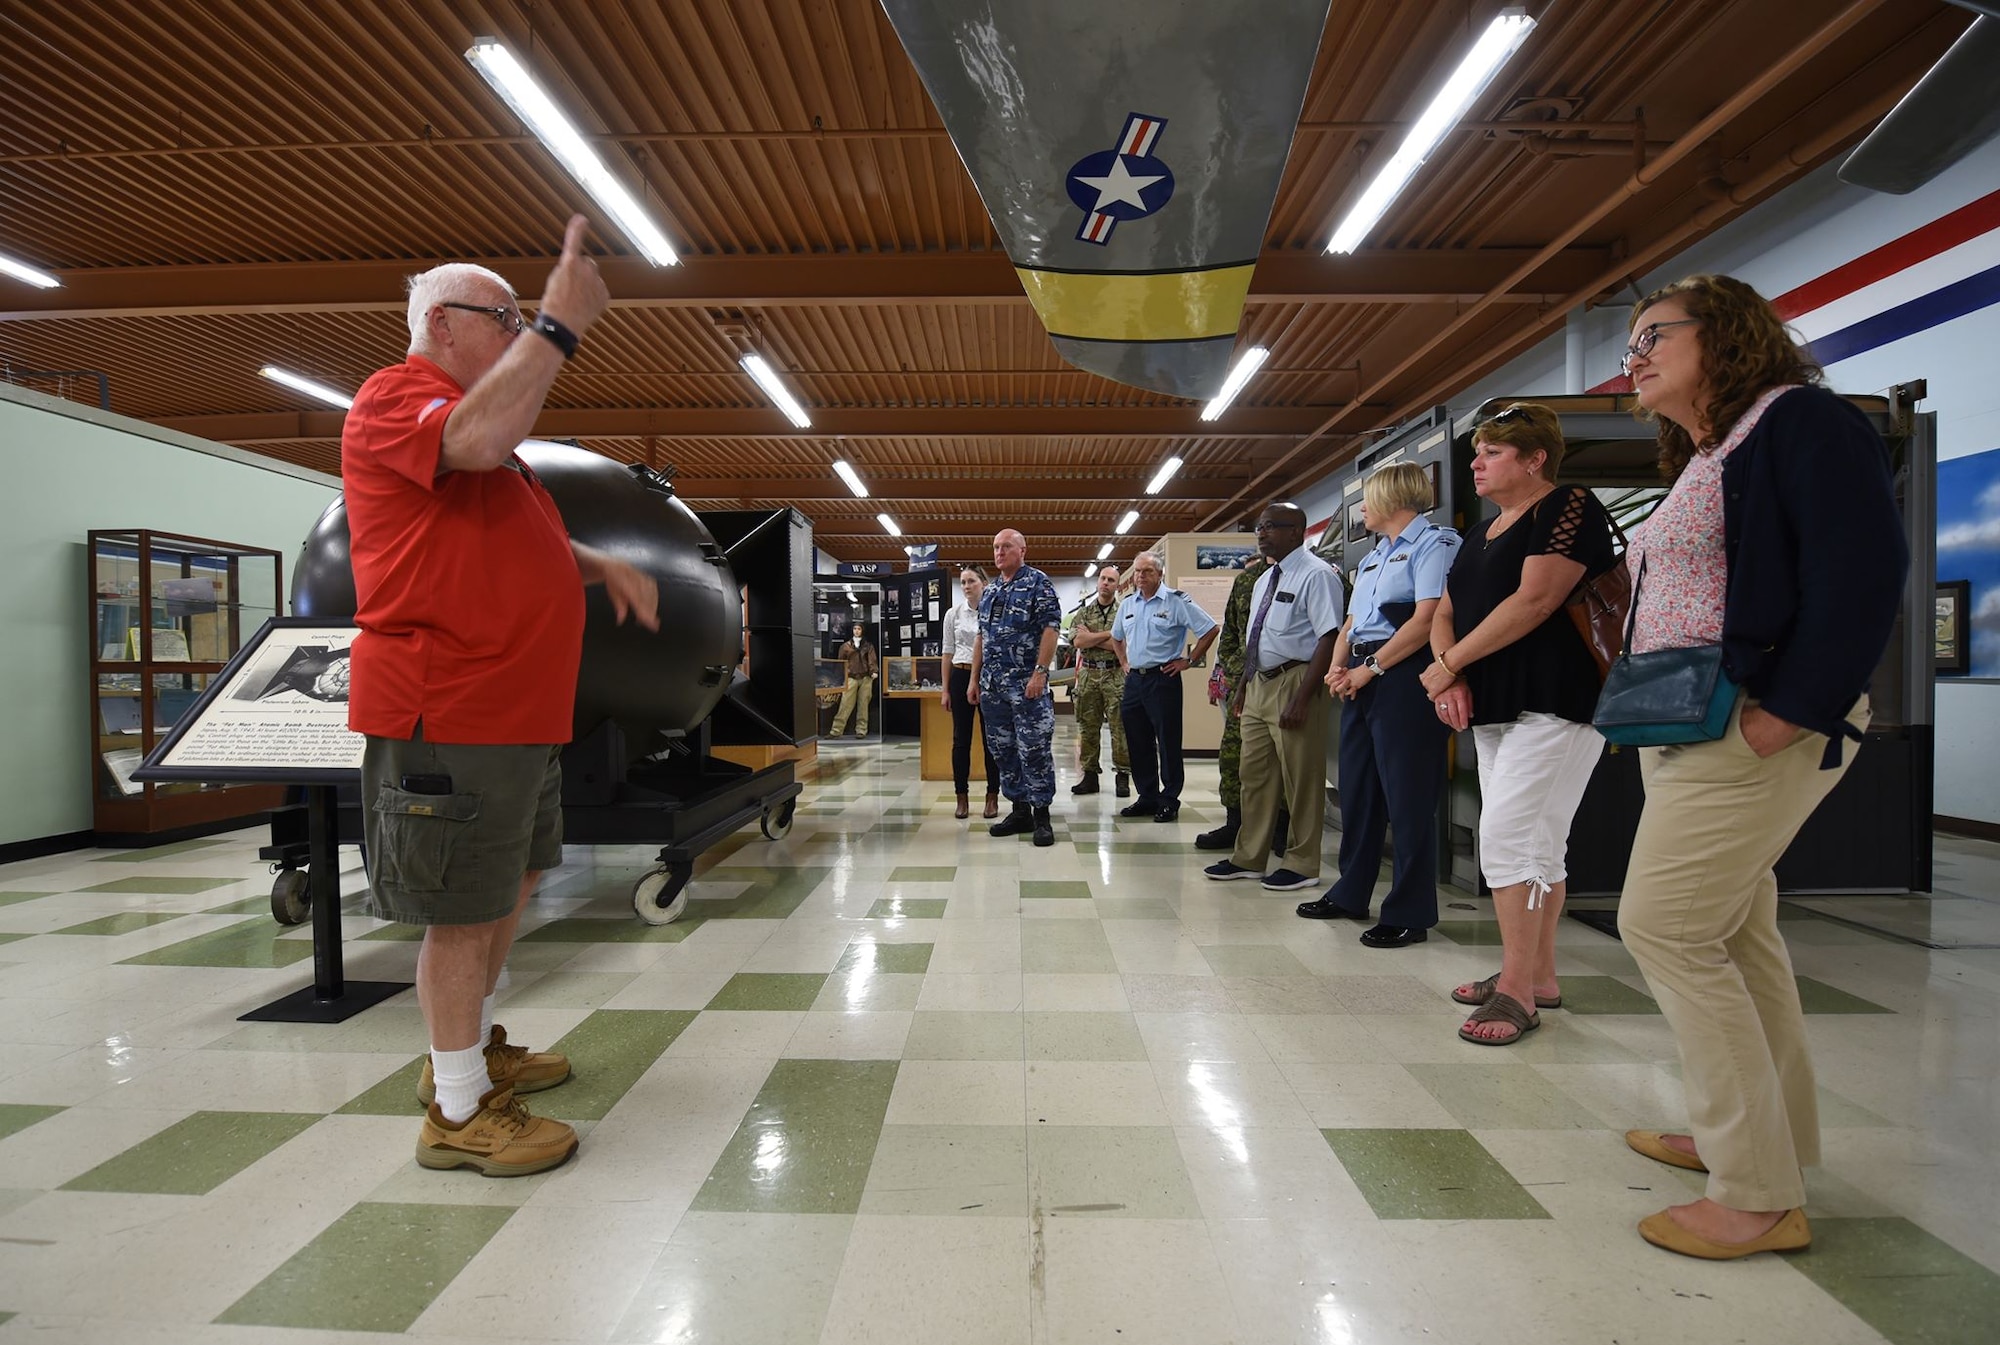 Five Eyes Air Force Interoperability Council representatives tour the Heritage Center at Travis Air Force Base, California, Aug. 9, 2019. The group, which comprises armed forces members from Australia, Canada, New Zealand, the United Kingdom and the United States, meet annually to discuss, learn and test existing and new interoperability strategies. (U.S. Air Force photo by Senior Airman Christian Conrad)